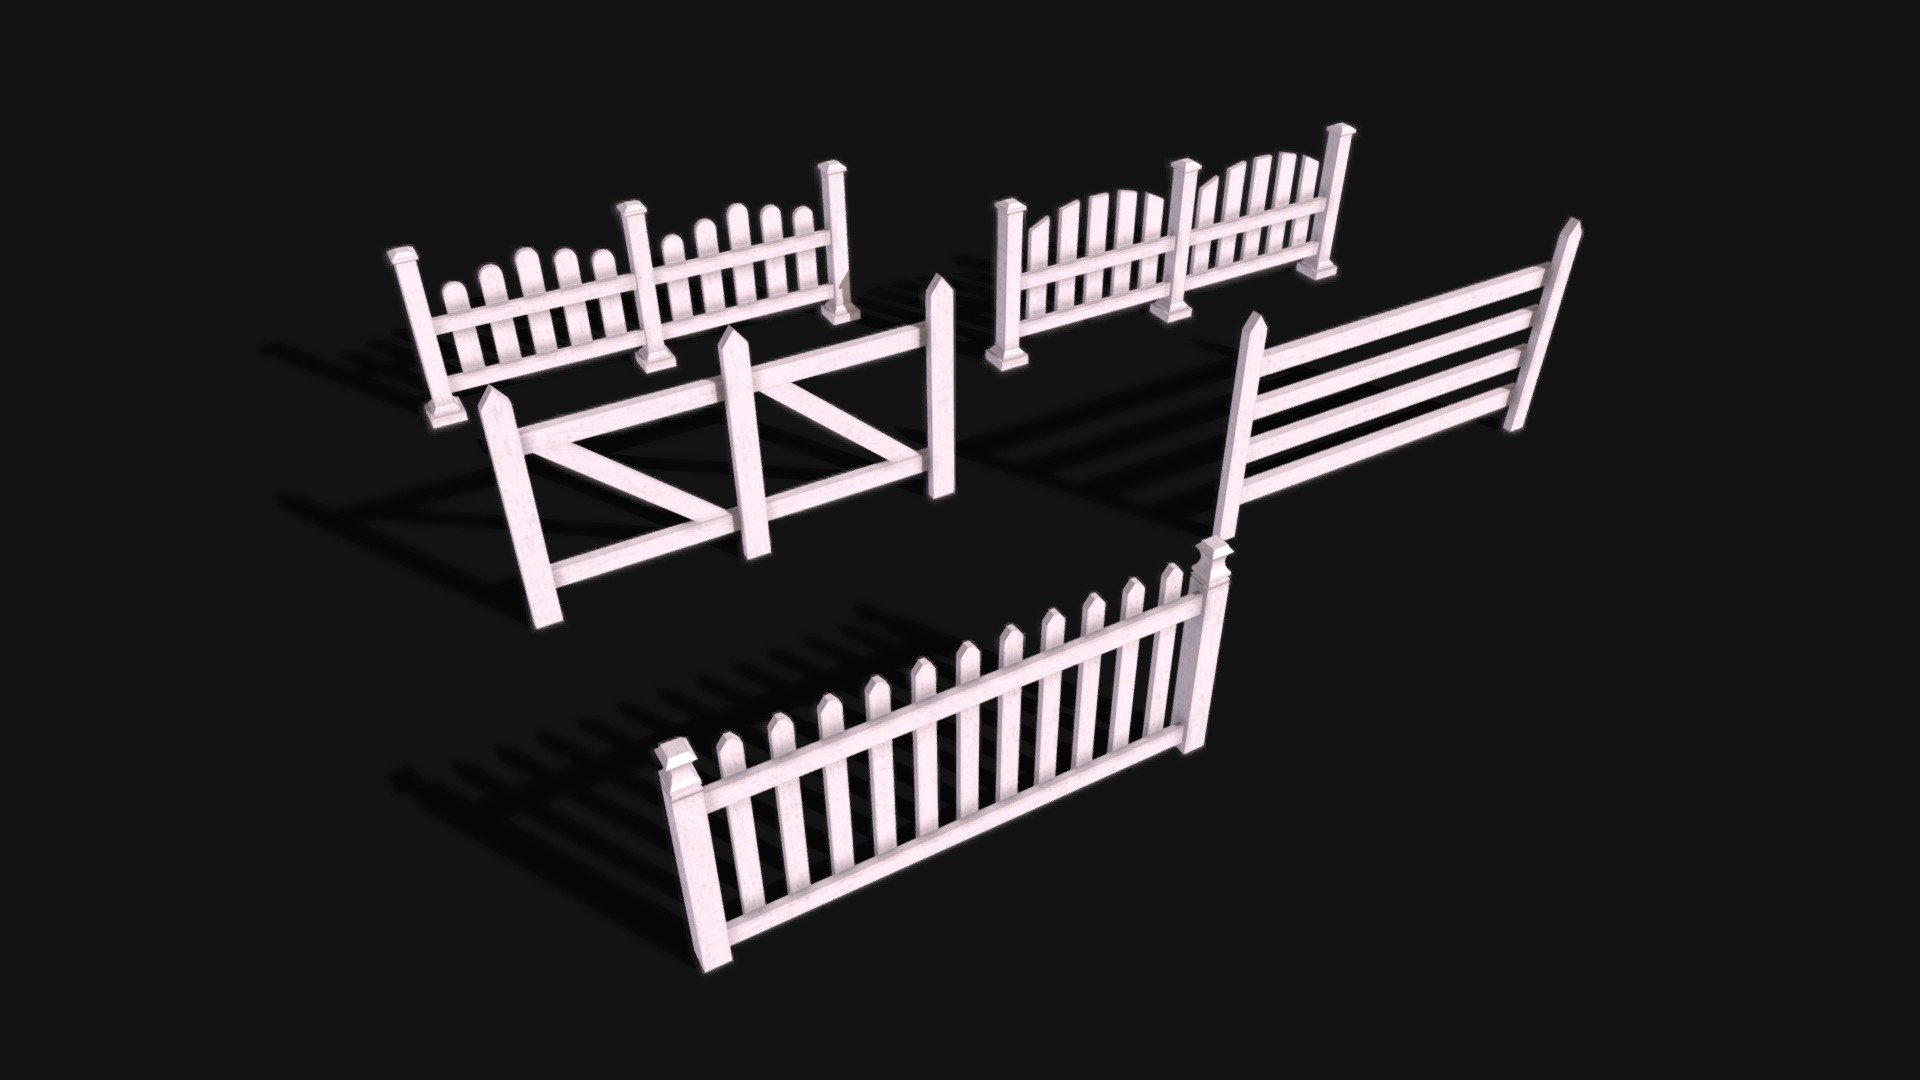 PBR Wooden Fence Pack for your 3D asset or 3D project. it also suitable for any visual production, game assets, AR, VR, interior rendering, advertising, and illustration. made in blender 3.6 and rendered with Cycles render engine. 

3DModel File Formats:

NOTE : All the texture (Texture Maps) are packed into a one Zip file called &ldquo;Textures